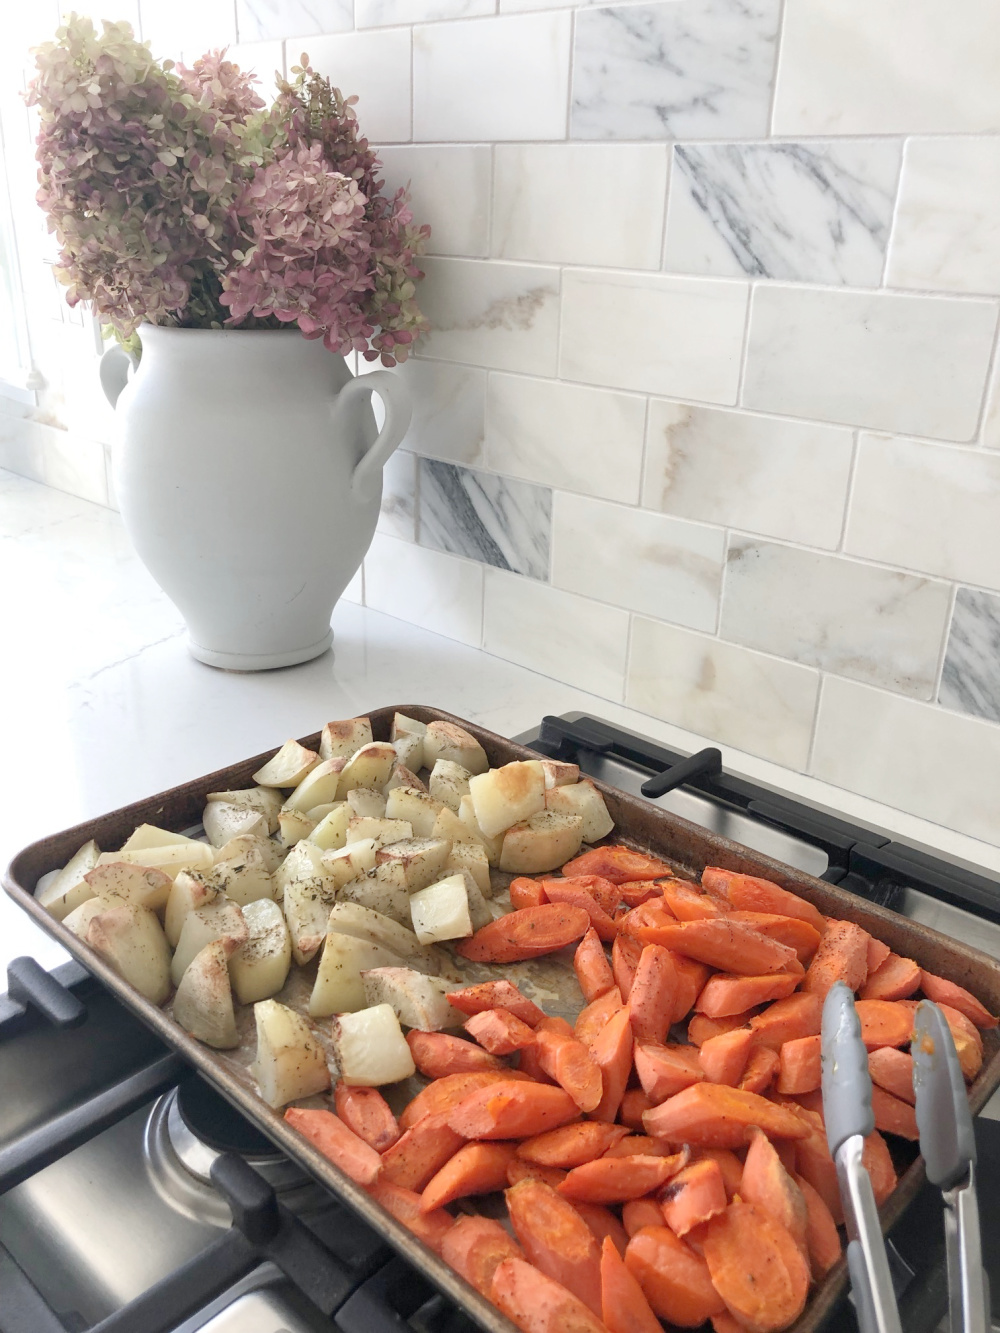 Roasted veges in my white kitchen - Hello Lovely Studio.